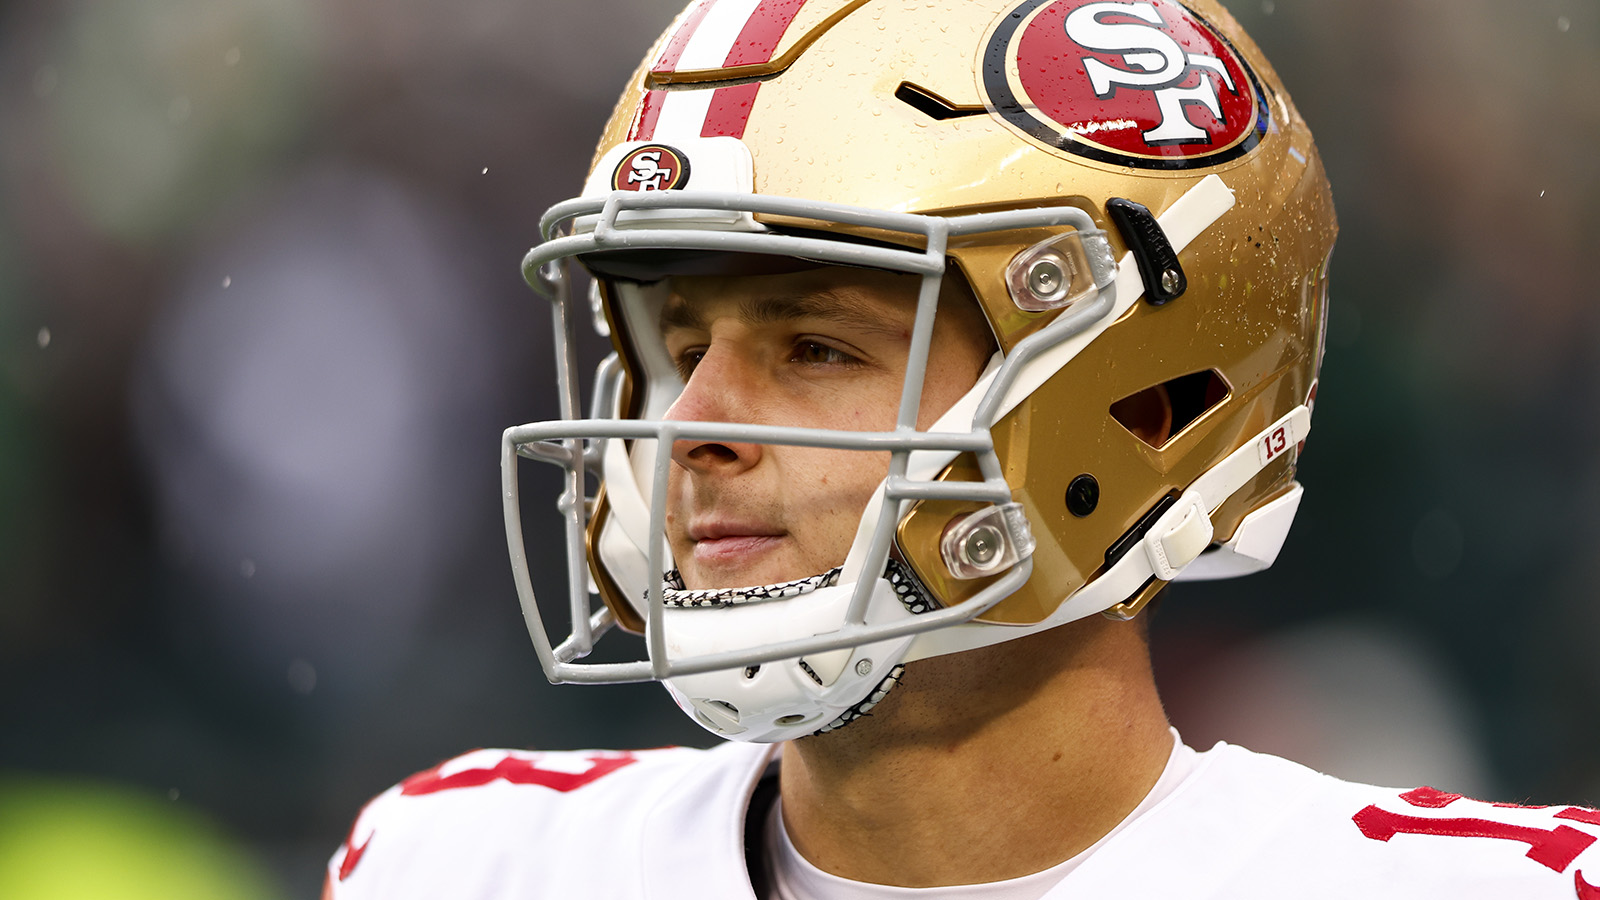 49ers QB Brock Purdy isn’t really sure if he’ll play in 2023 after UCL surgery